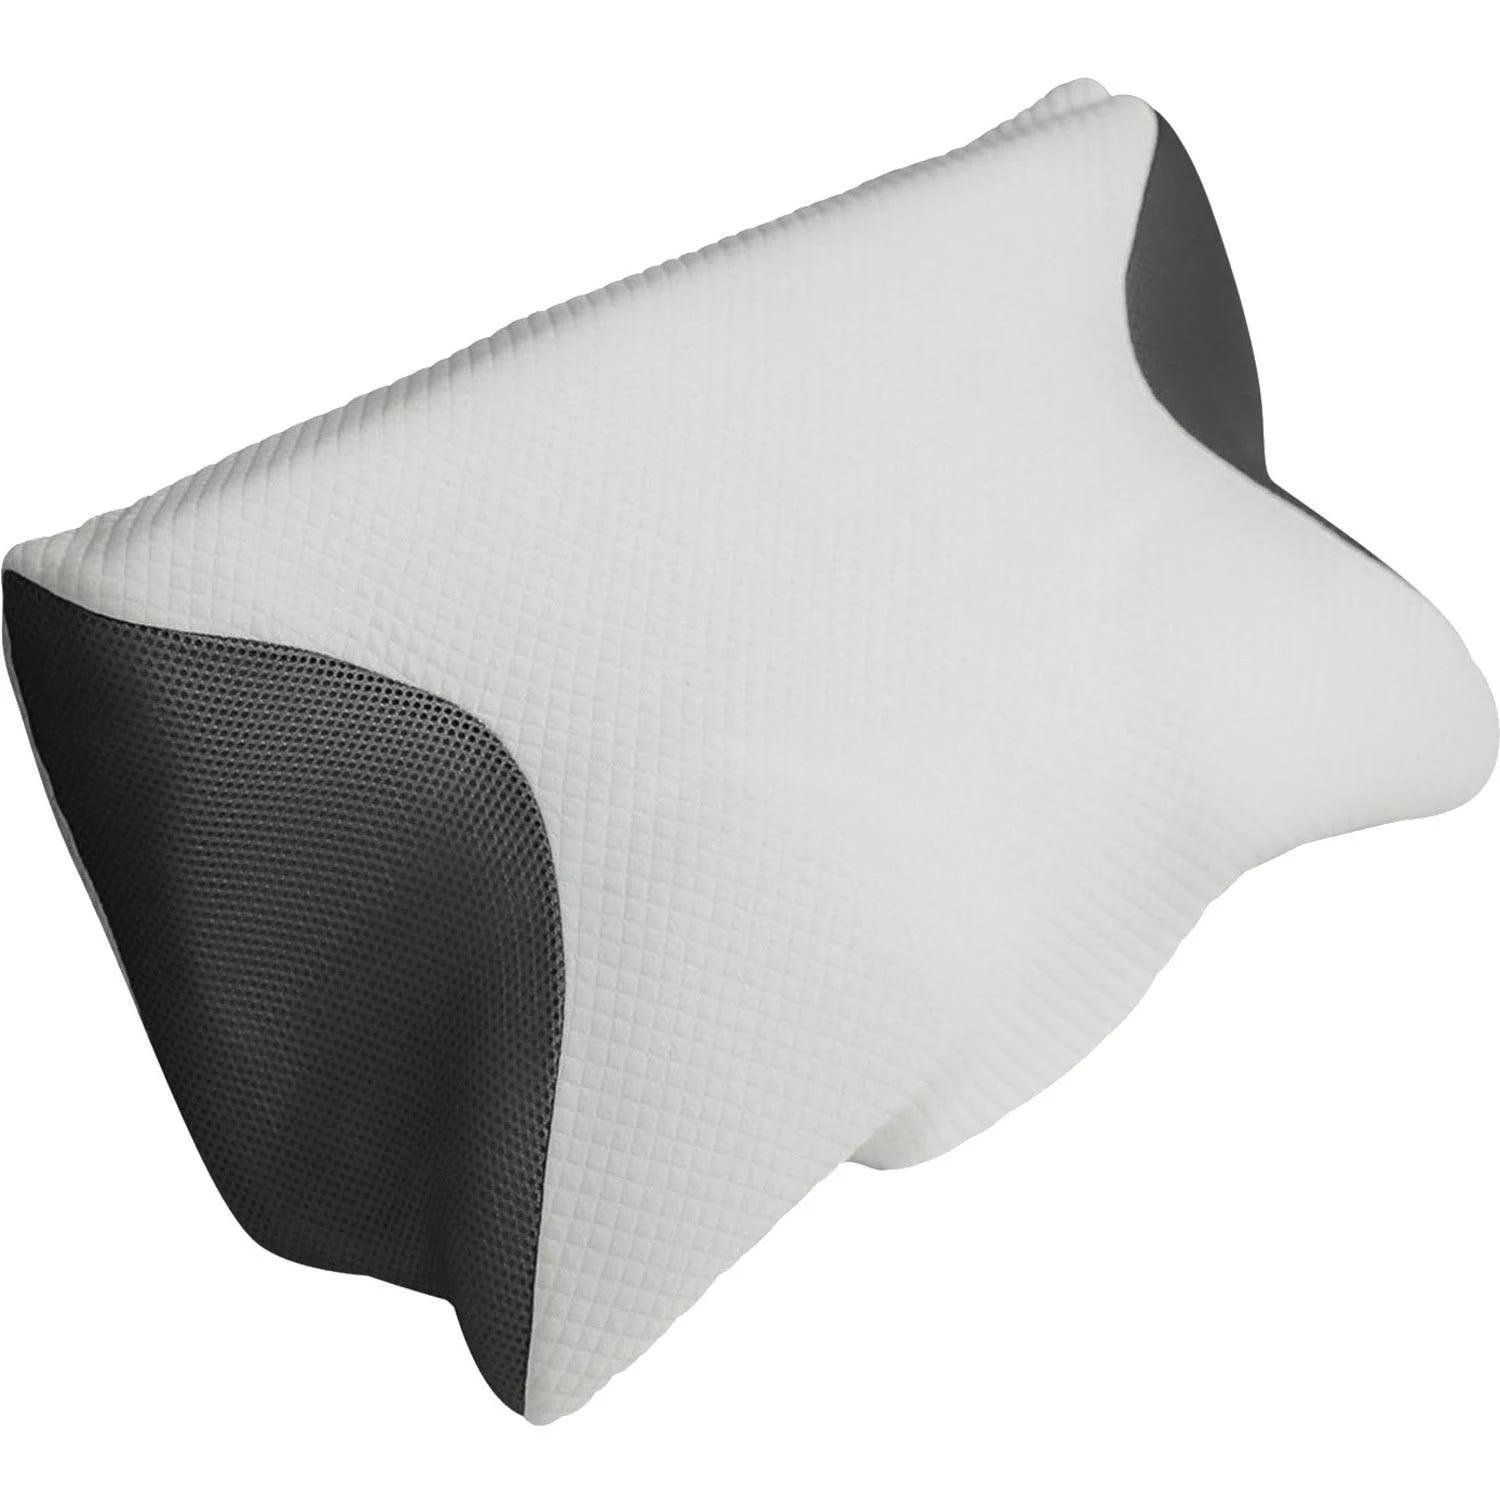 Orthopedic Carbon SnoreX Pillow for Cervical Support and Sleep Quality | Image